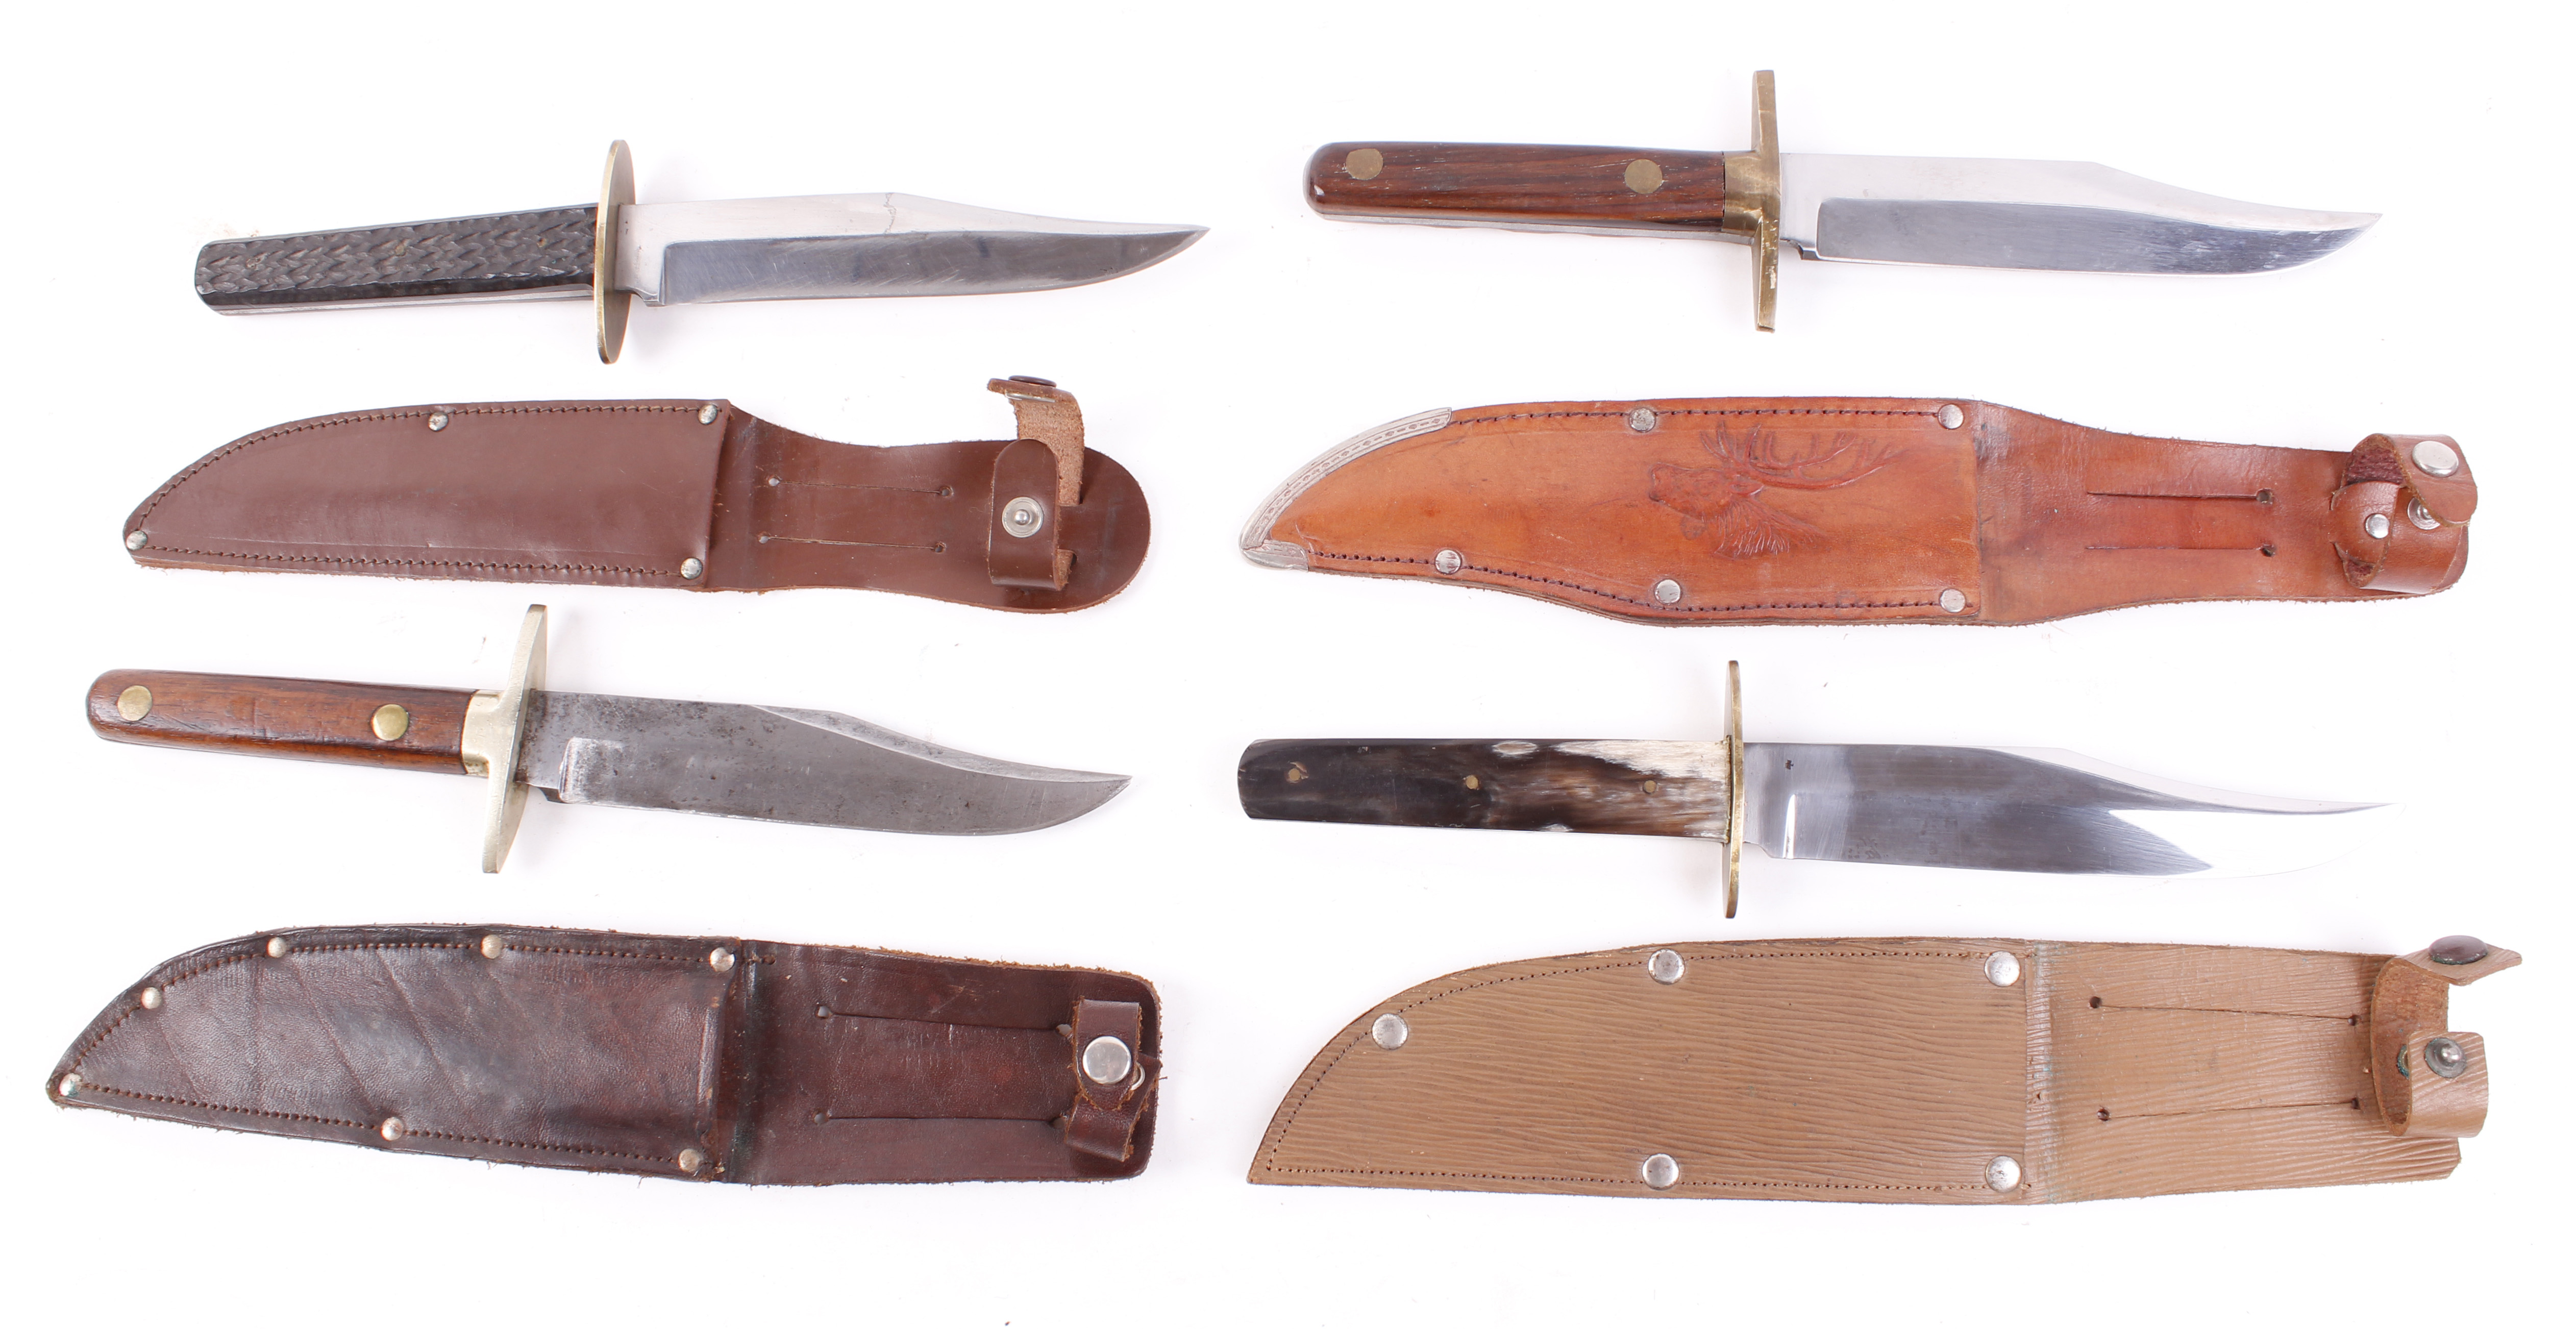 4 x 6 ins bowie knives in leather sheaths by Rodgers, Knowill and two others - Image 2 of 2